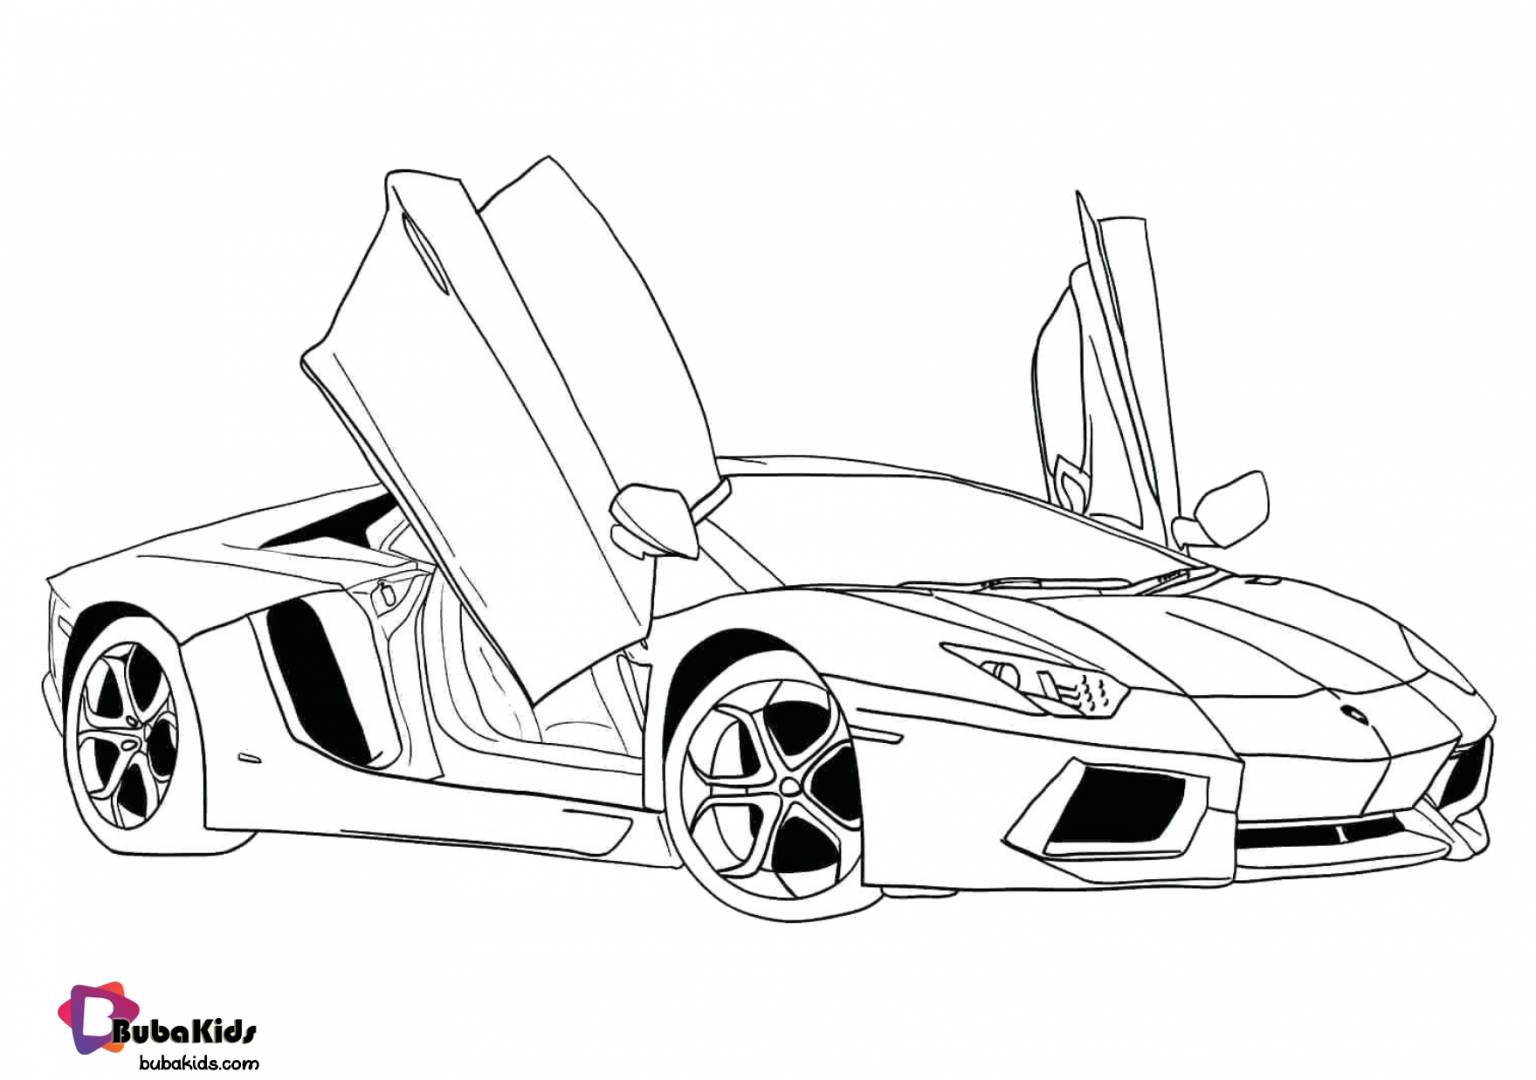 Free download super car coloring pages for kids | BubaKids.com